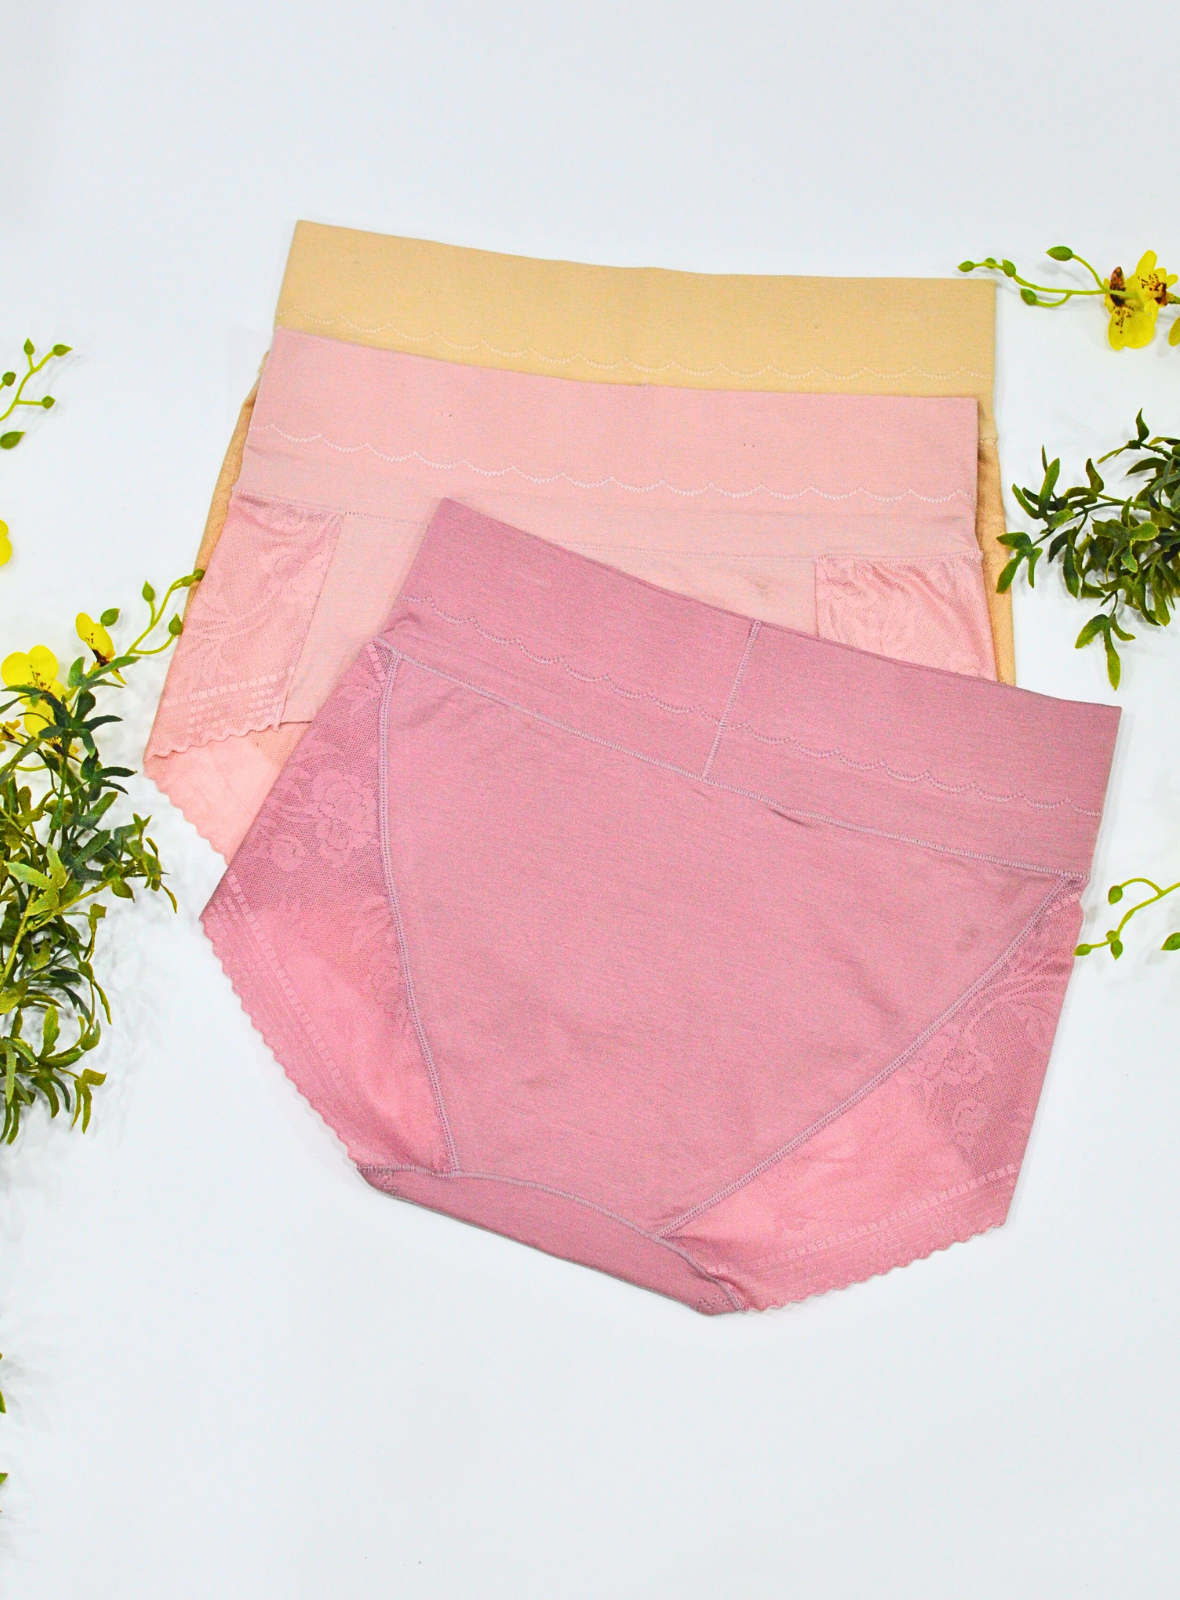 3 Pack Noelle High Waisted Cotton with Lace Panties Bundle B